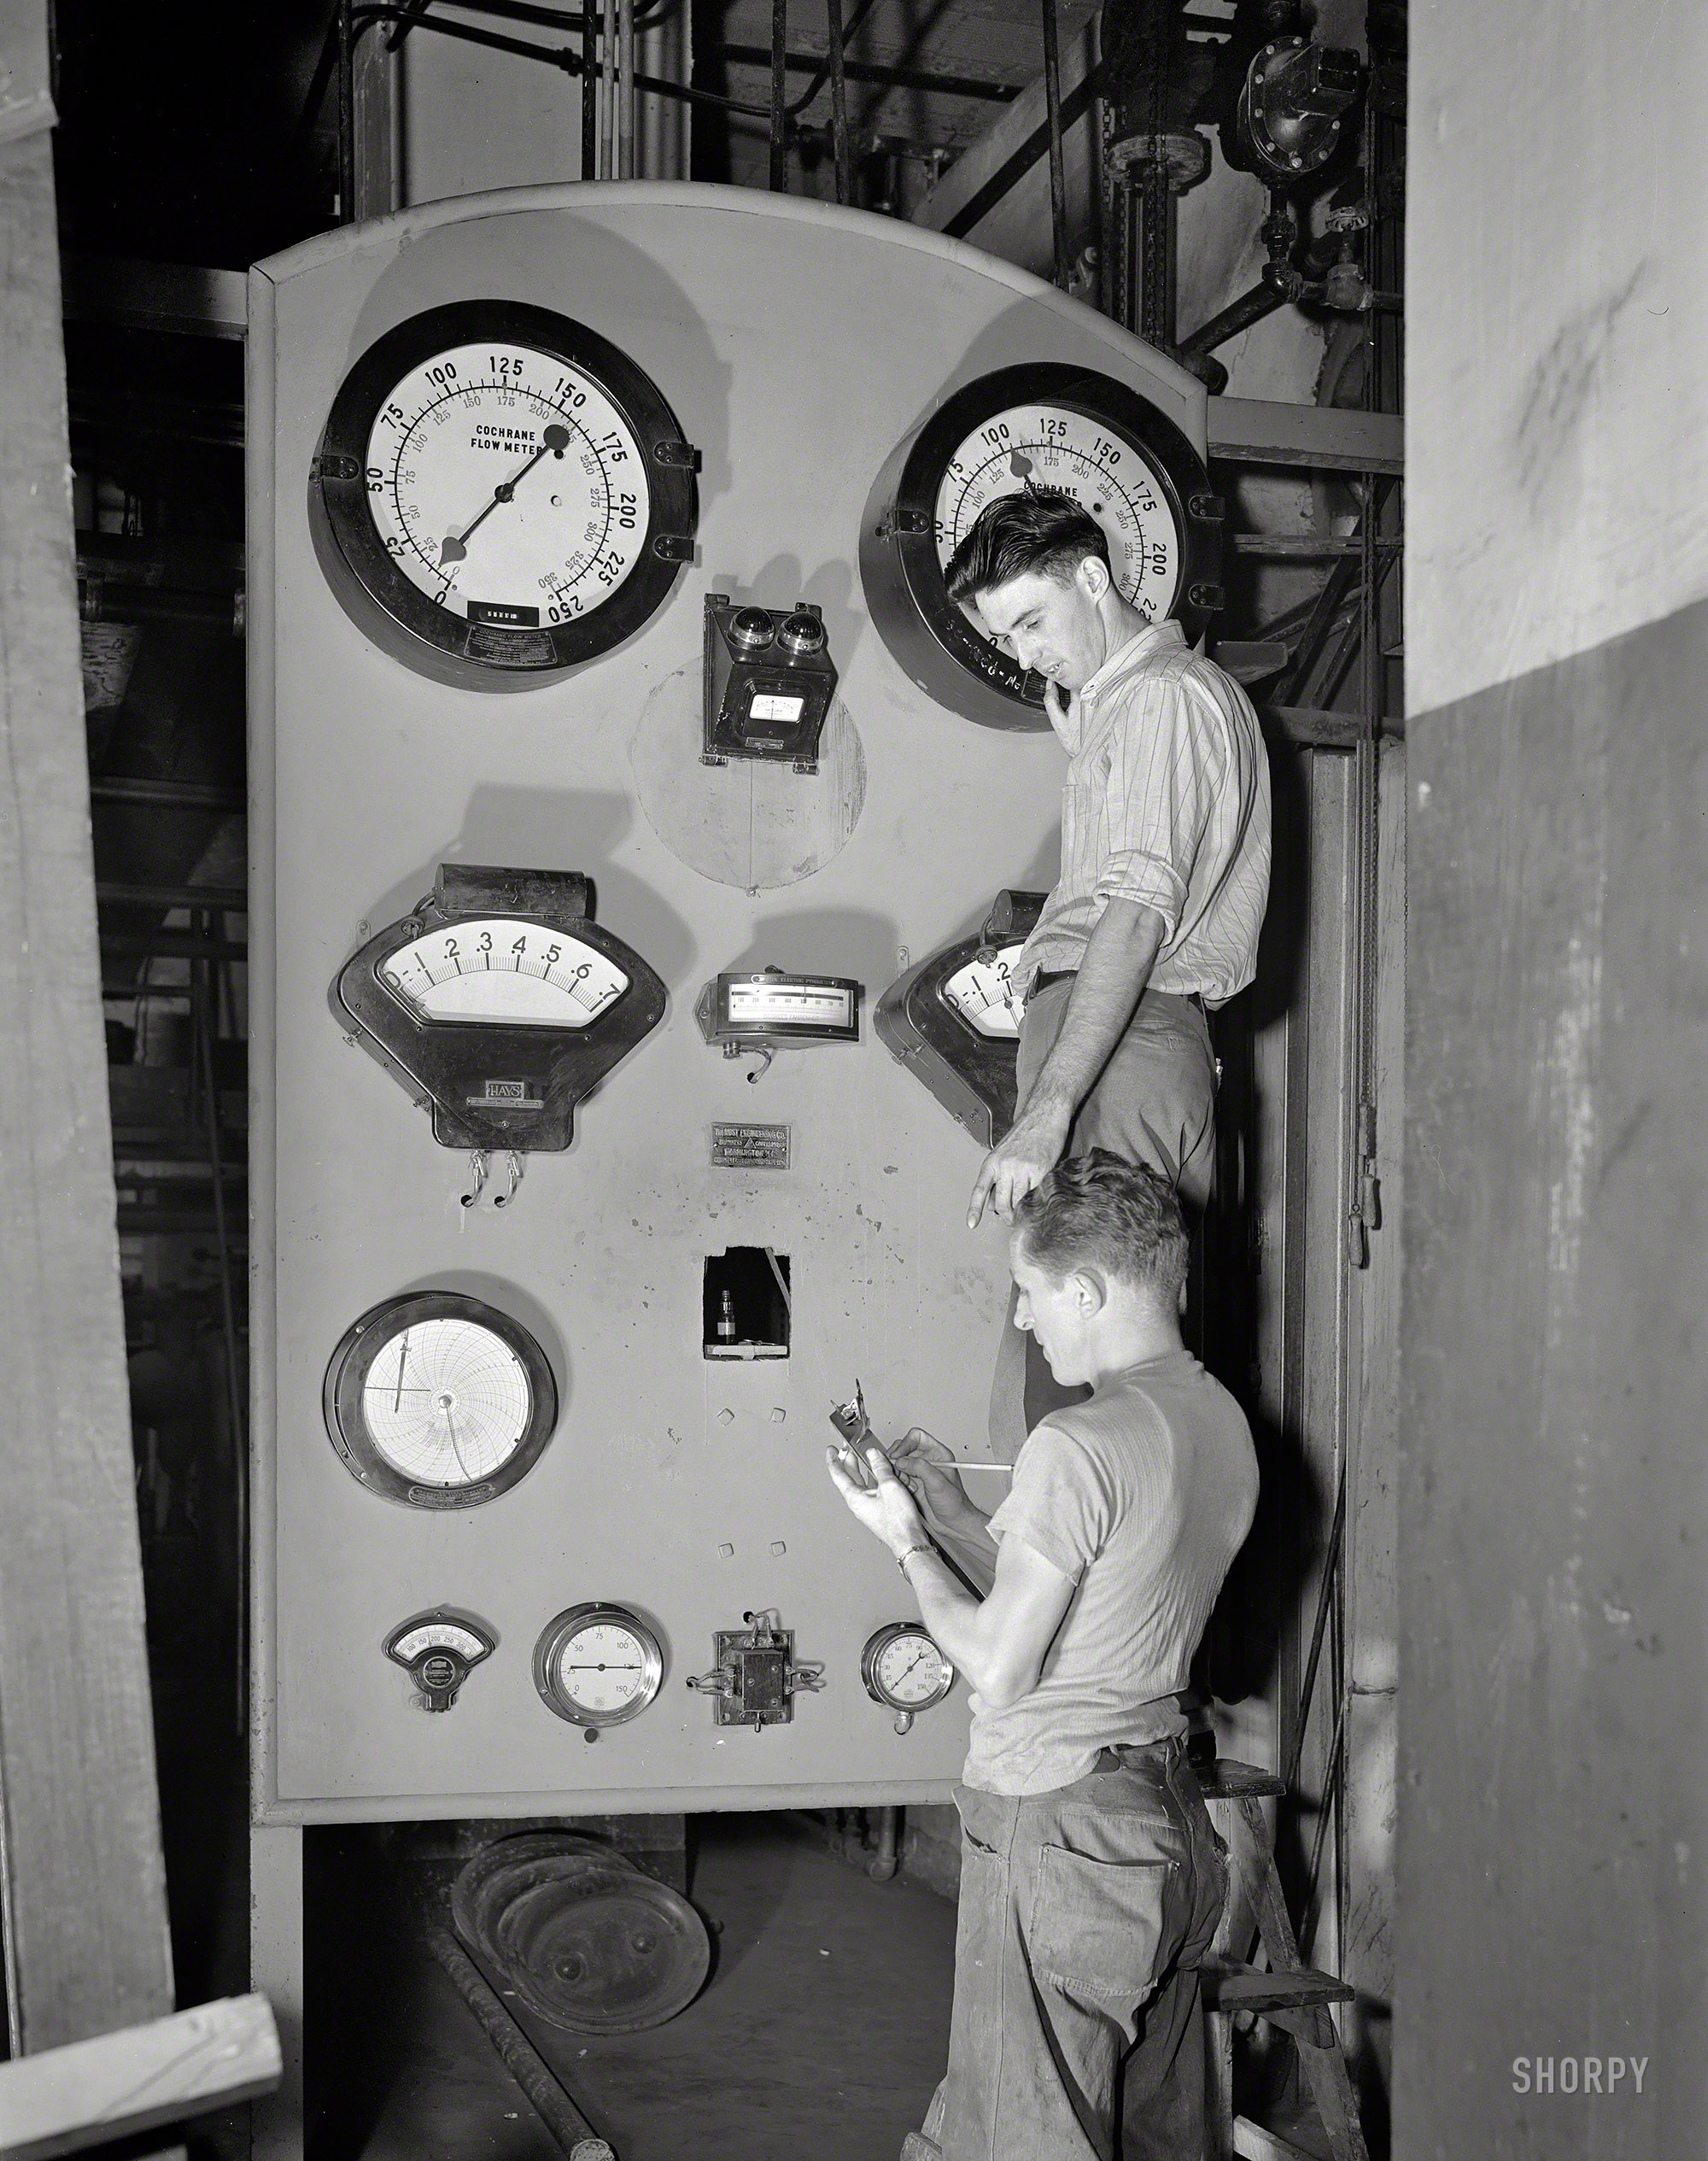 September 1942. "Washington, D.C. Conversion of the Shoreham Hotel furnace from oil to coal burning system." Crank it, boys, and let's see what this thing'll do. Photo by Howard Liberman for the Office of War Information. View full size.